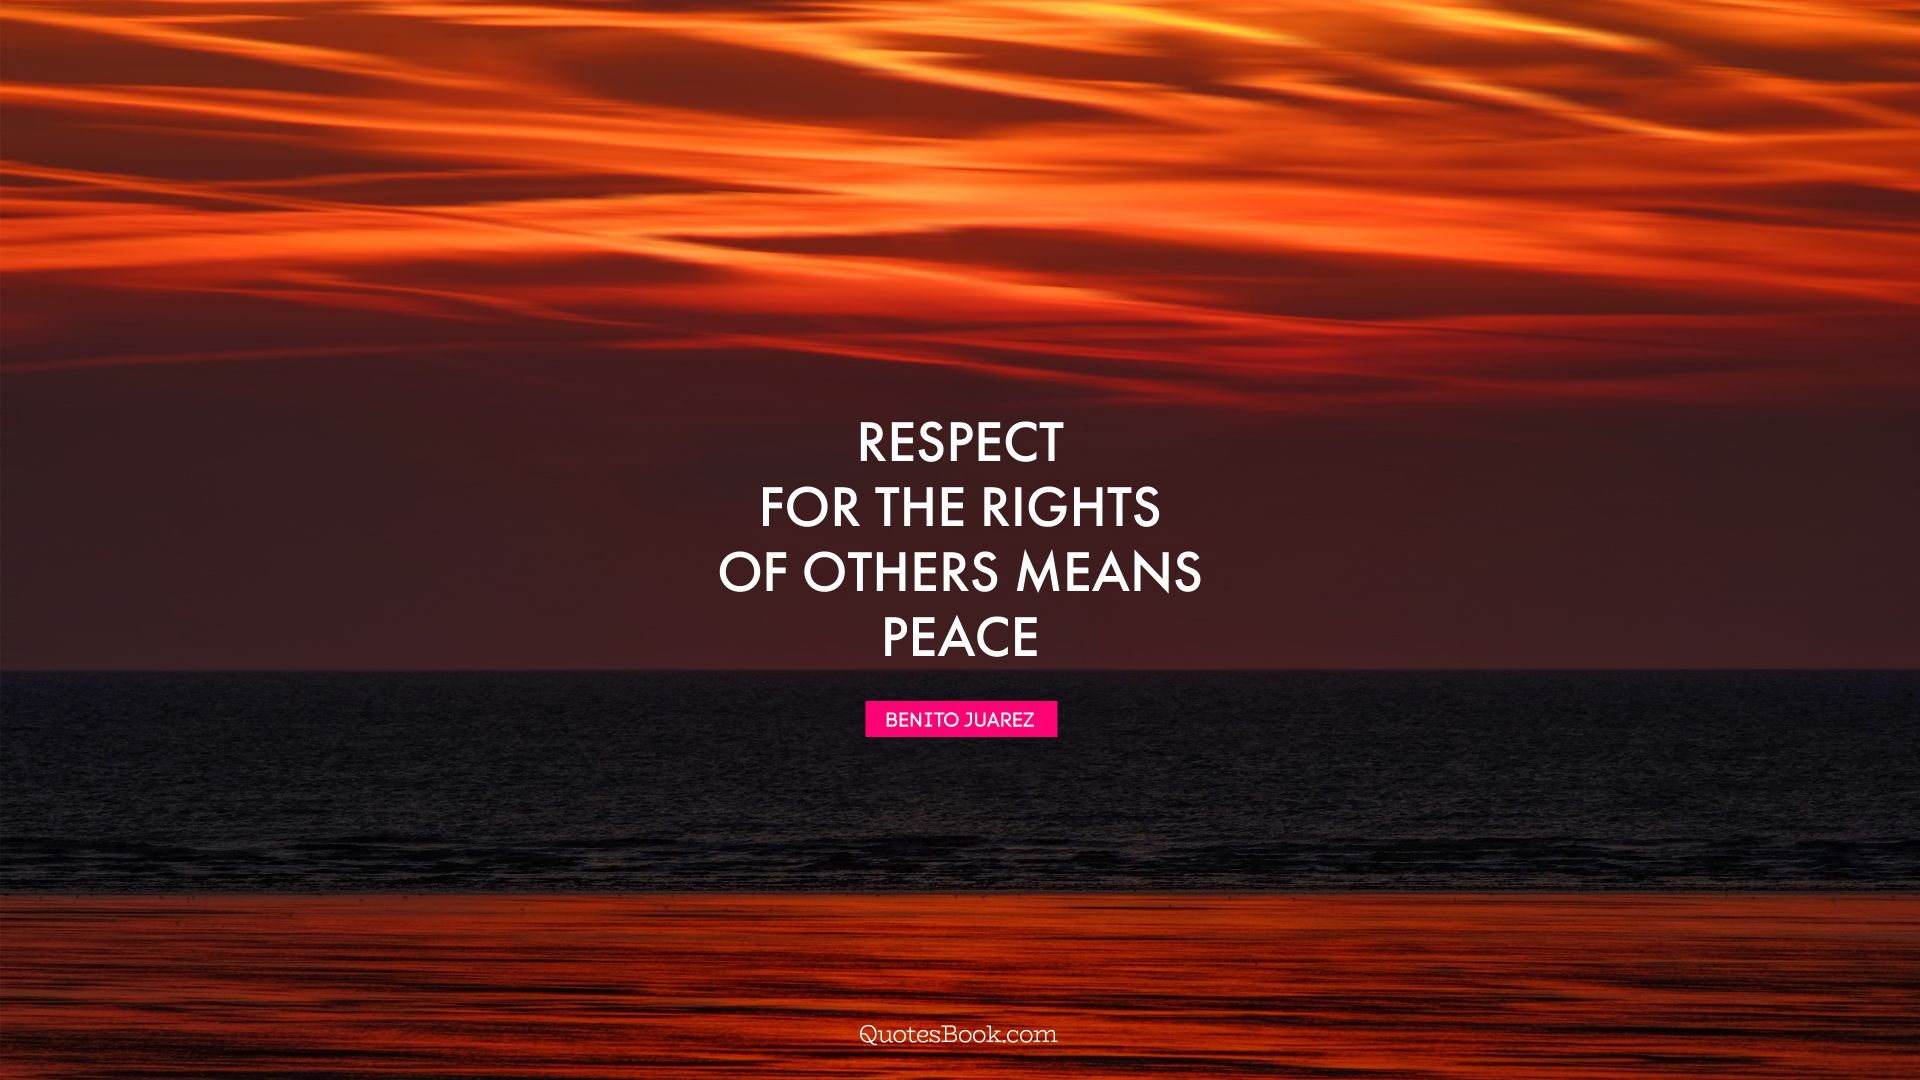 Respect for the rights of others means peace. - Quote by Benito Juarez